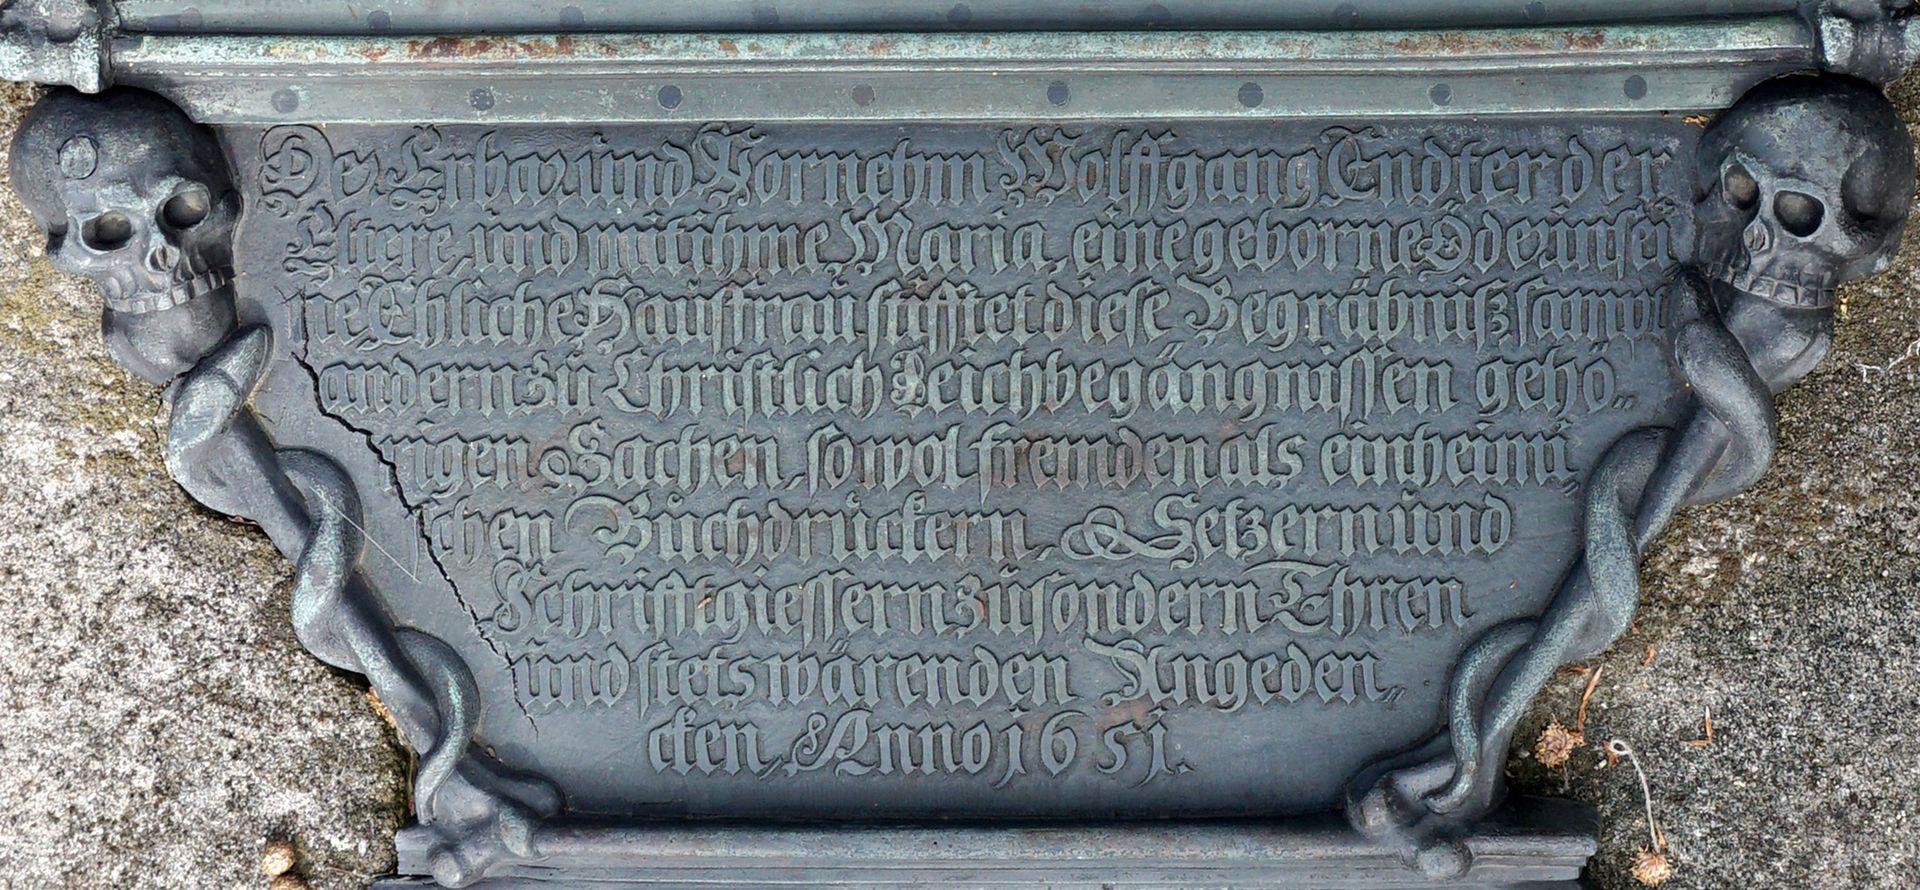 Epitaph of the printer, typesetter and type foundry burial place Donor inscription